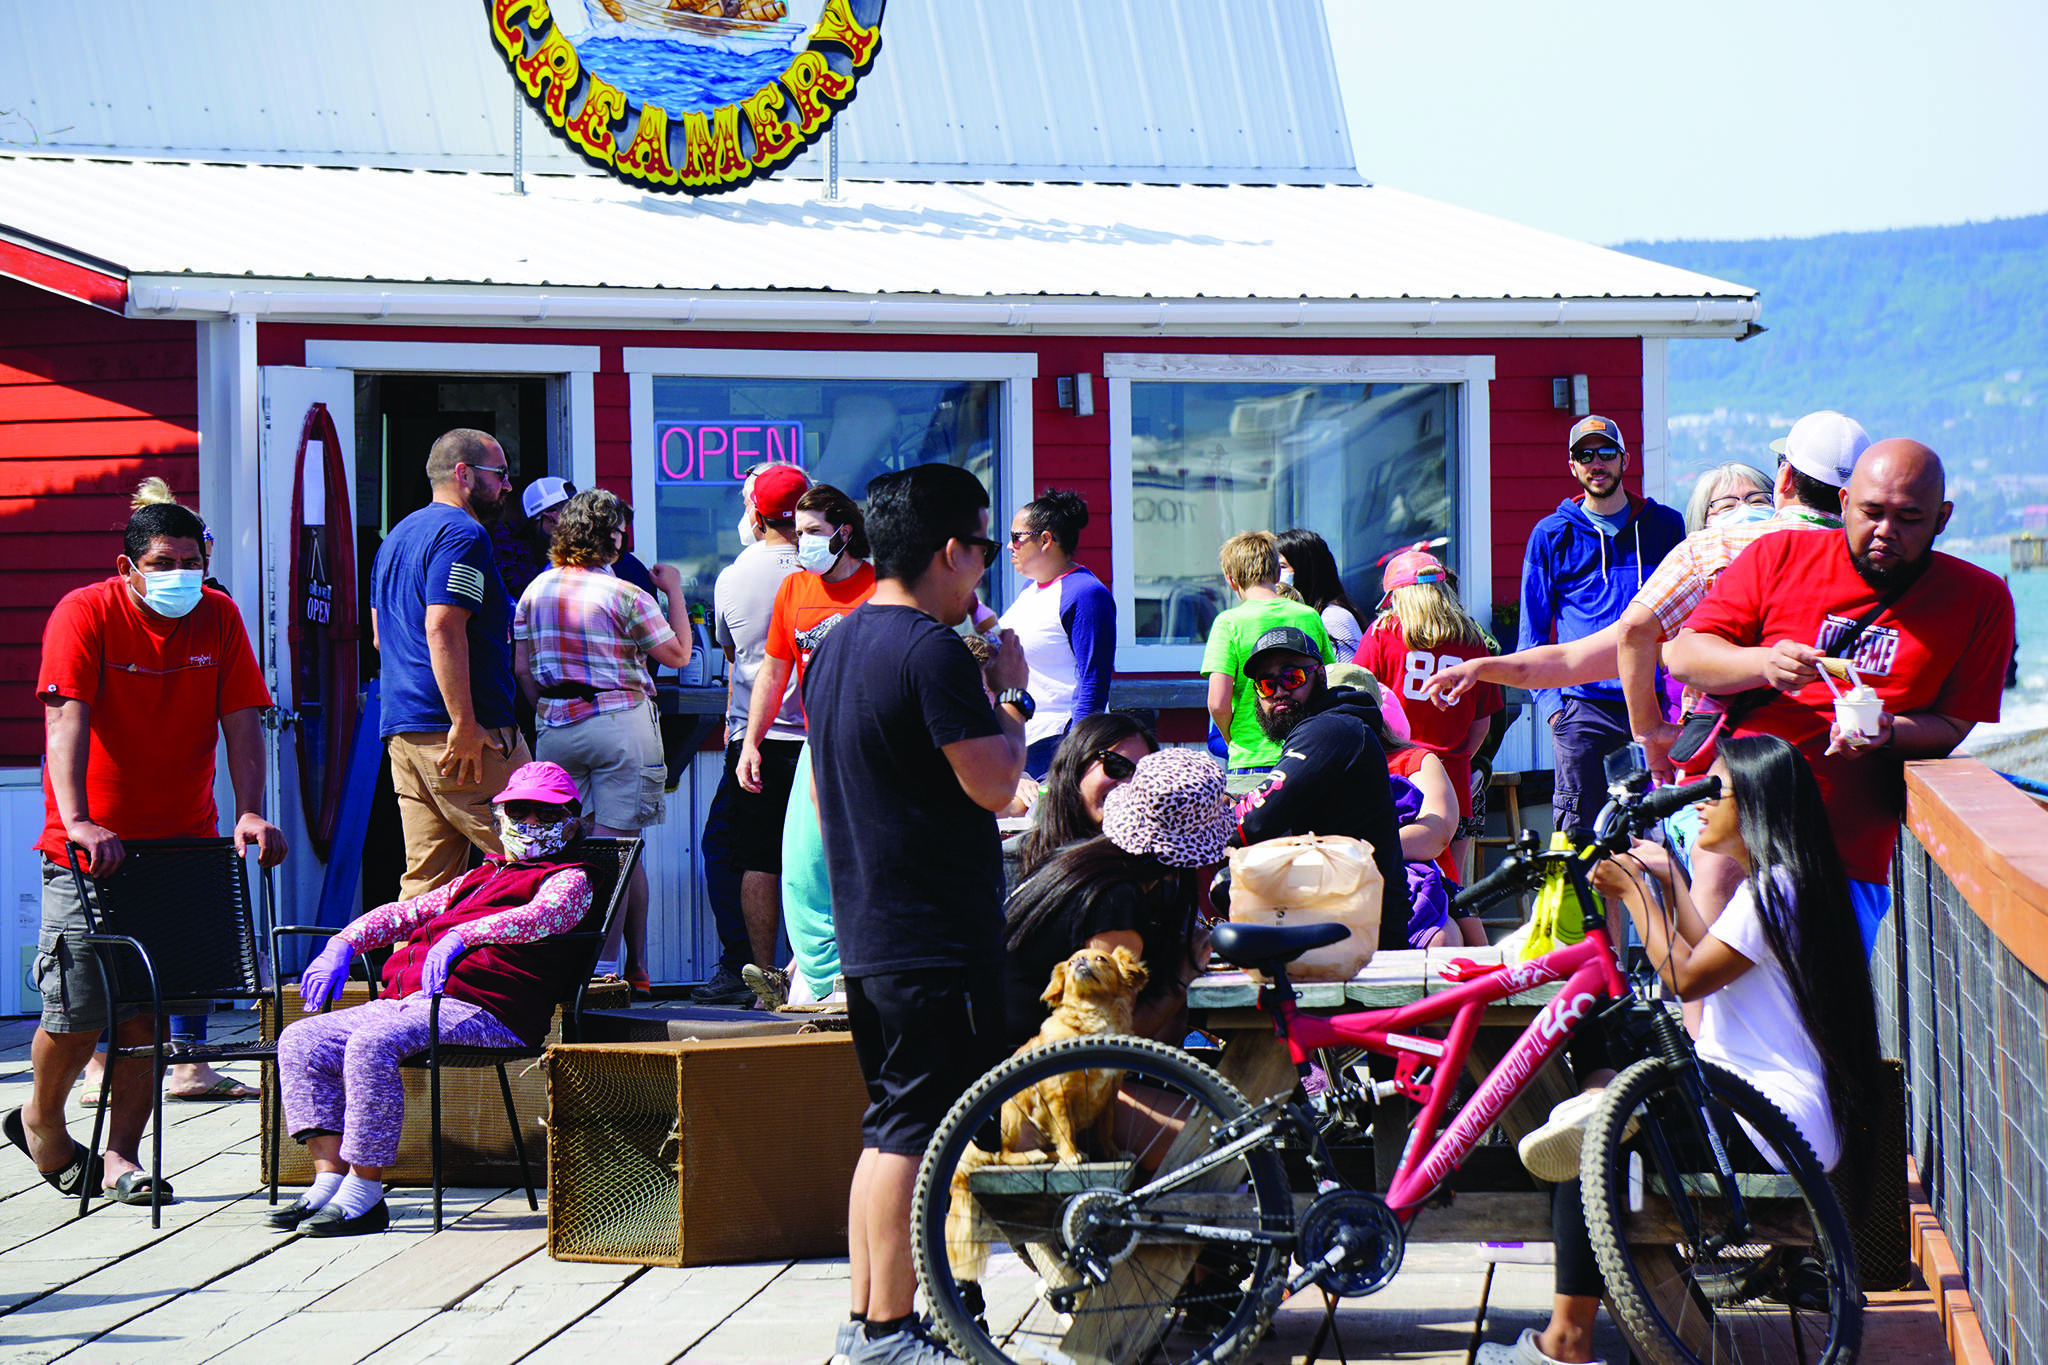 Visitors enjoy the sun on July 4, 2020, on a deck at a Homer Spit boardwalk in Homer, Alaska. In a press conference on Tuesday, July 7, 2020, Alaska Chief Medical Officer Dr. Anne Zink advised people to minimize the risk of getting infected by COVID-19 by avoiding crowded spaces. (Photo by Michael Armstrong/Homer News)